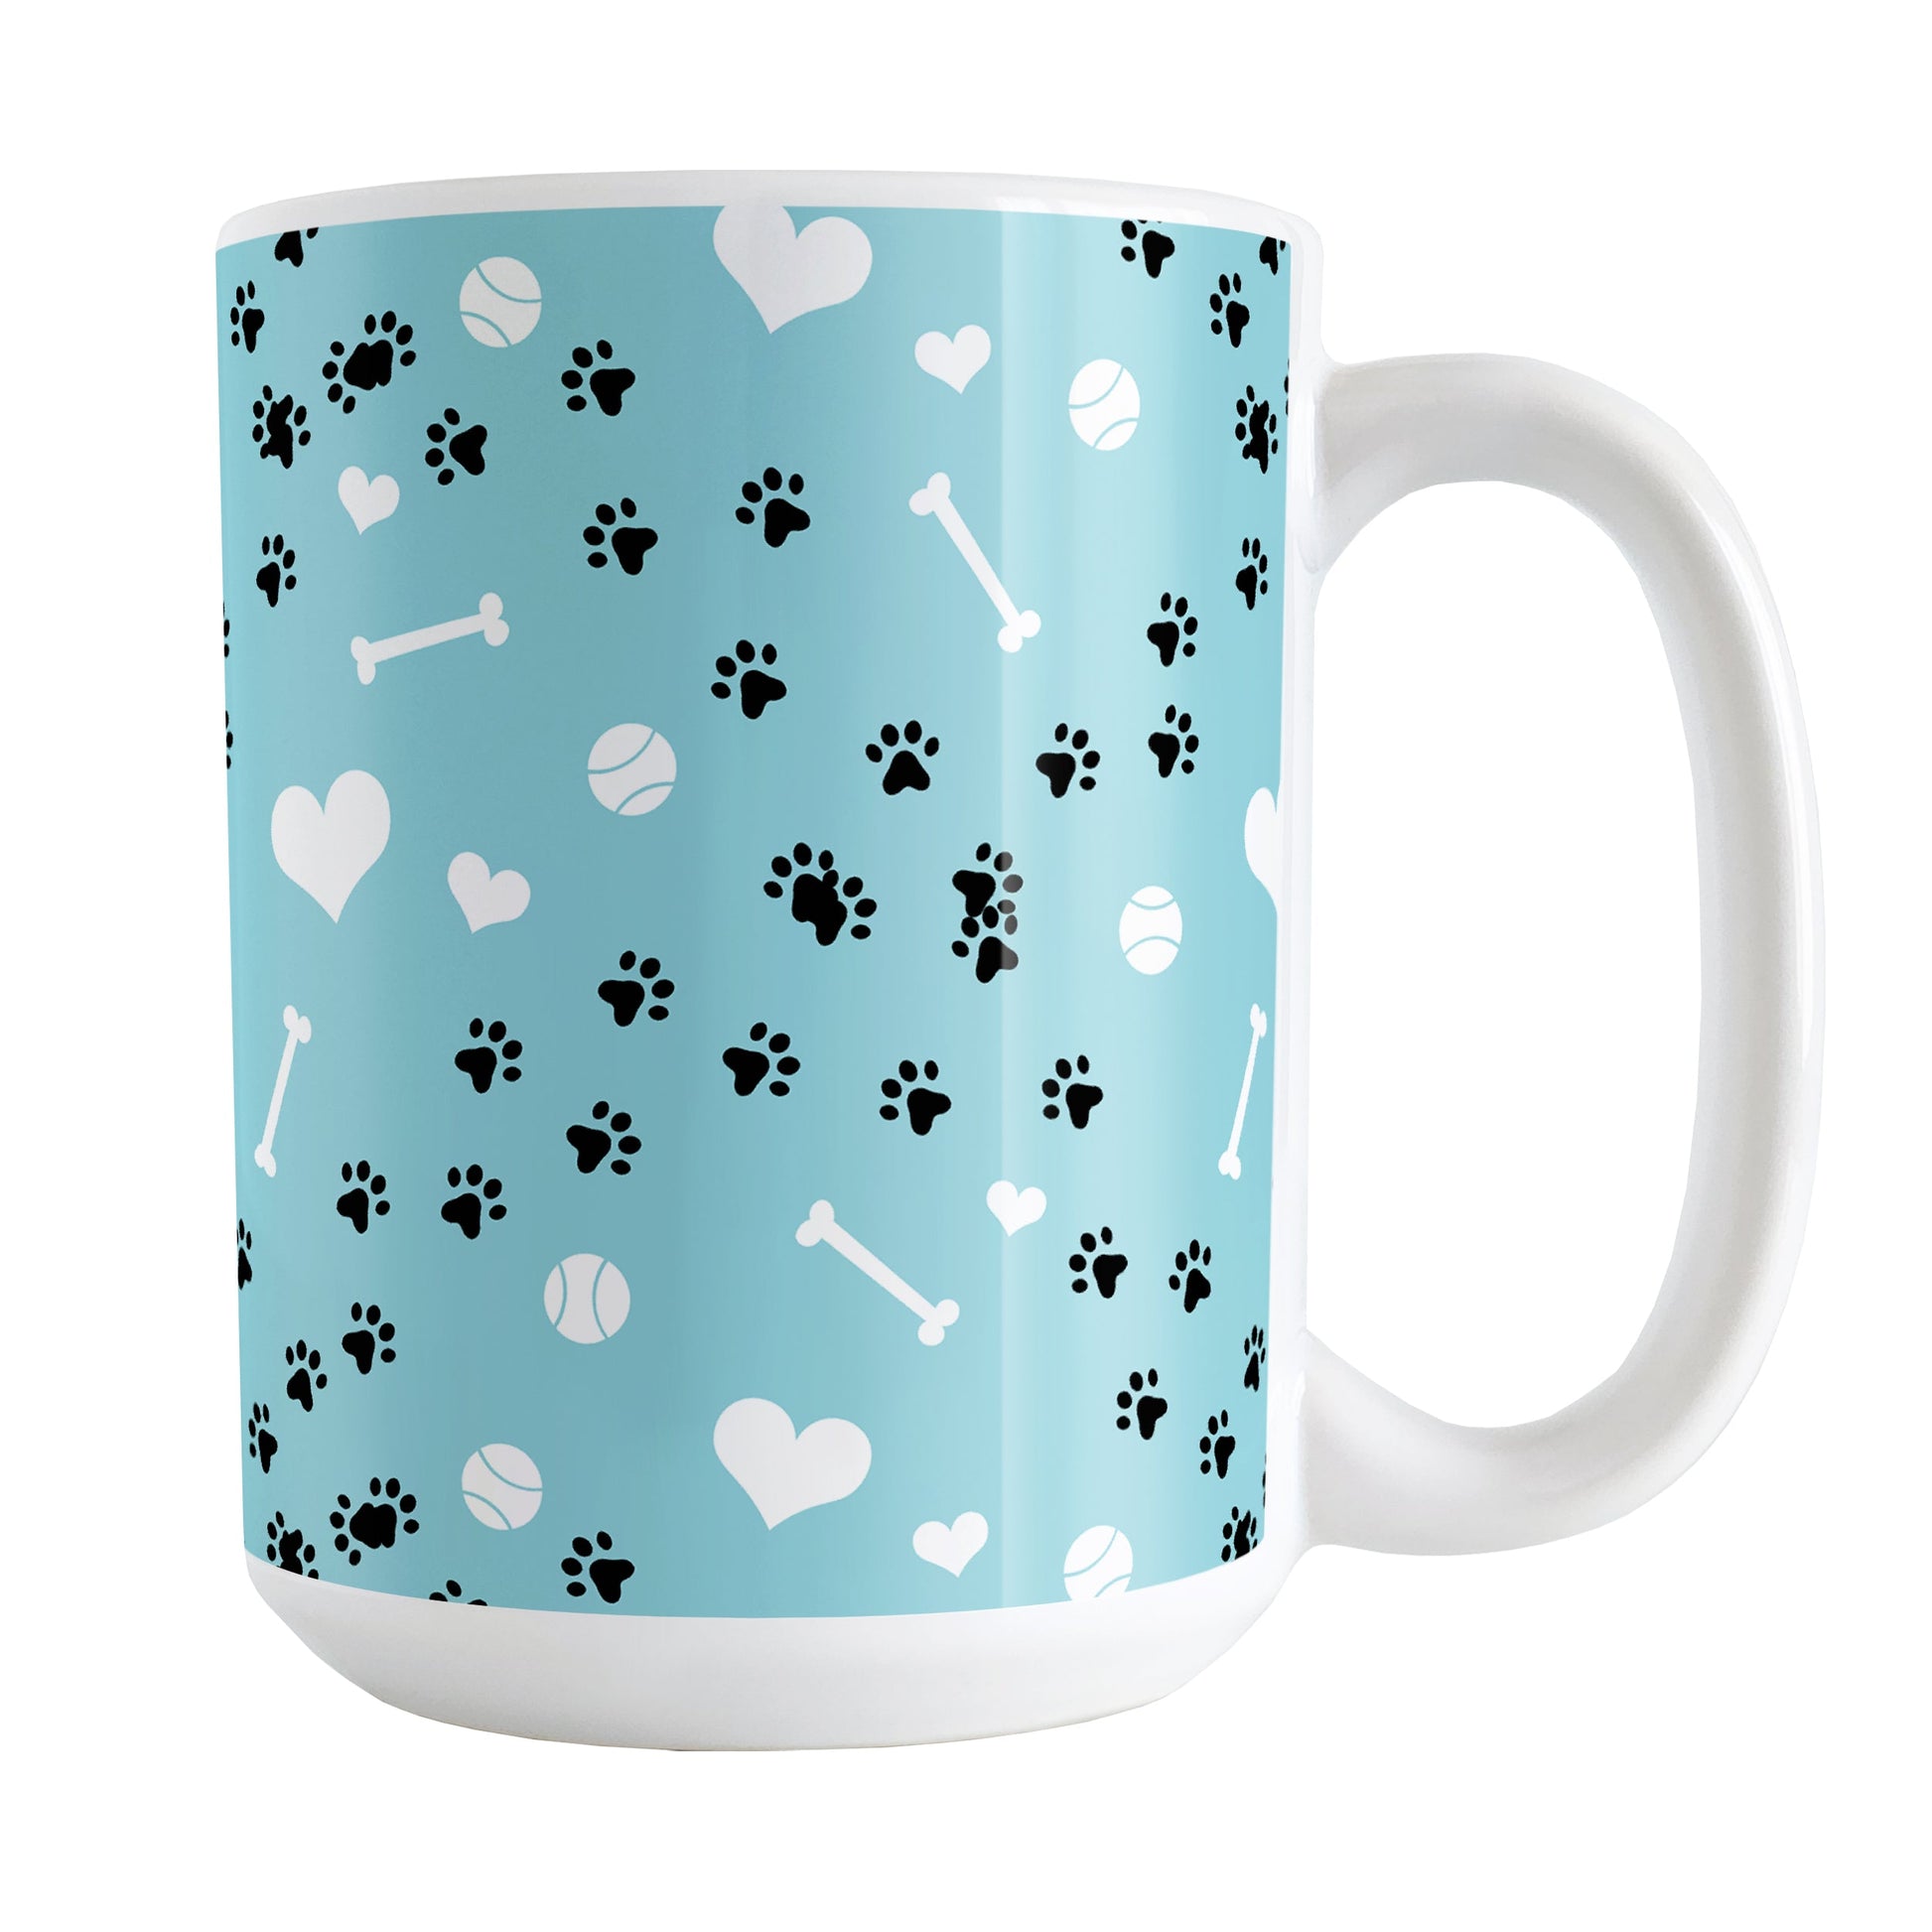 Puppy Run Blue Dog Mug (15oz) at Amy's Coffee Mugs. A ceramic coffee mug designed with a pattern of chaotic tracks of puppy paw prints running around the mug with white dog bones, balls, and hearts over a light blue background. This mug is perfect for people who love the chaotic play of puppies, love dogs, and like blue mugs. 